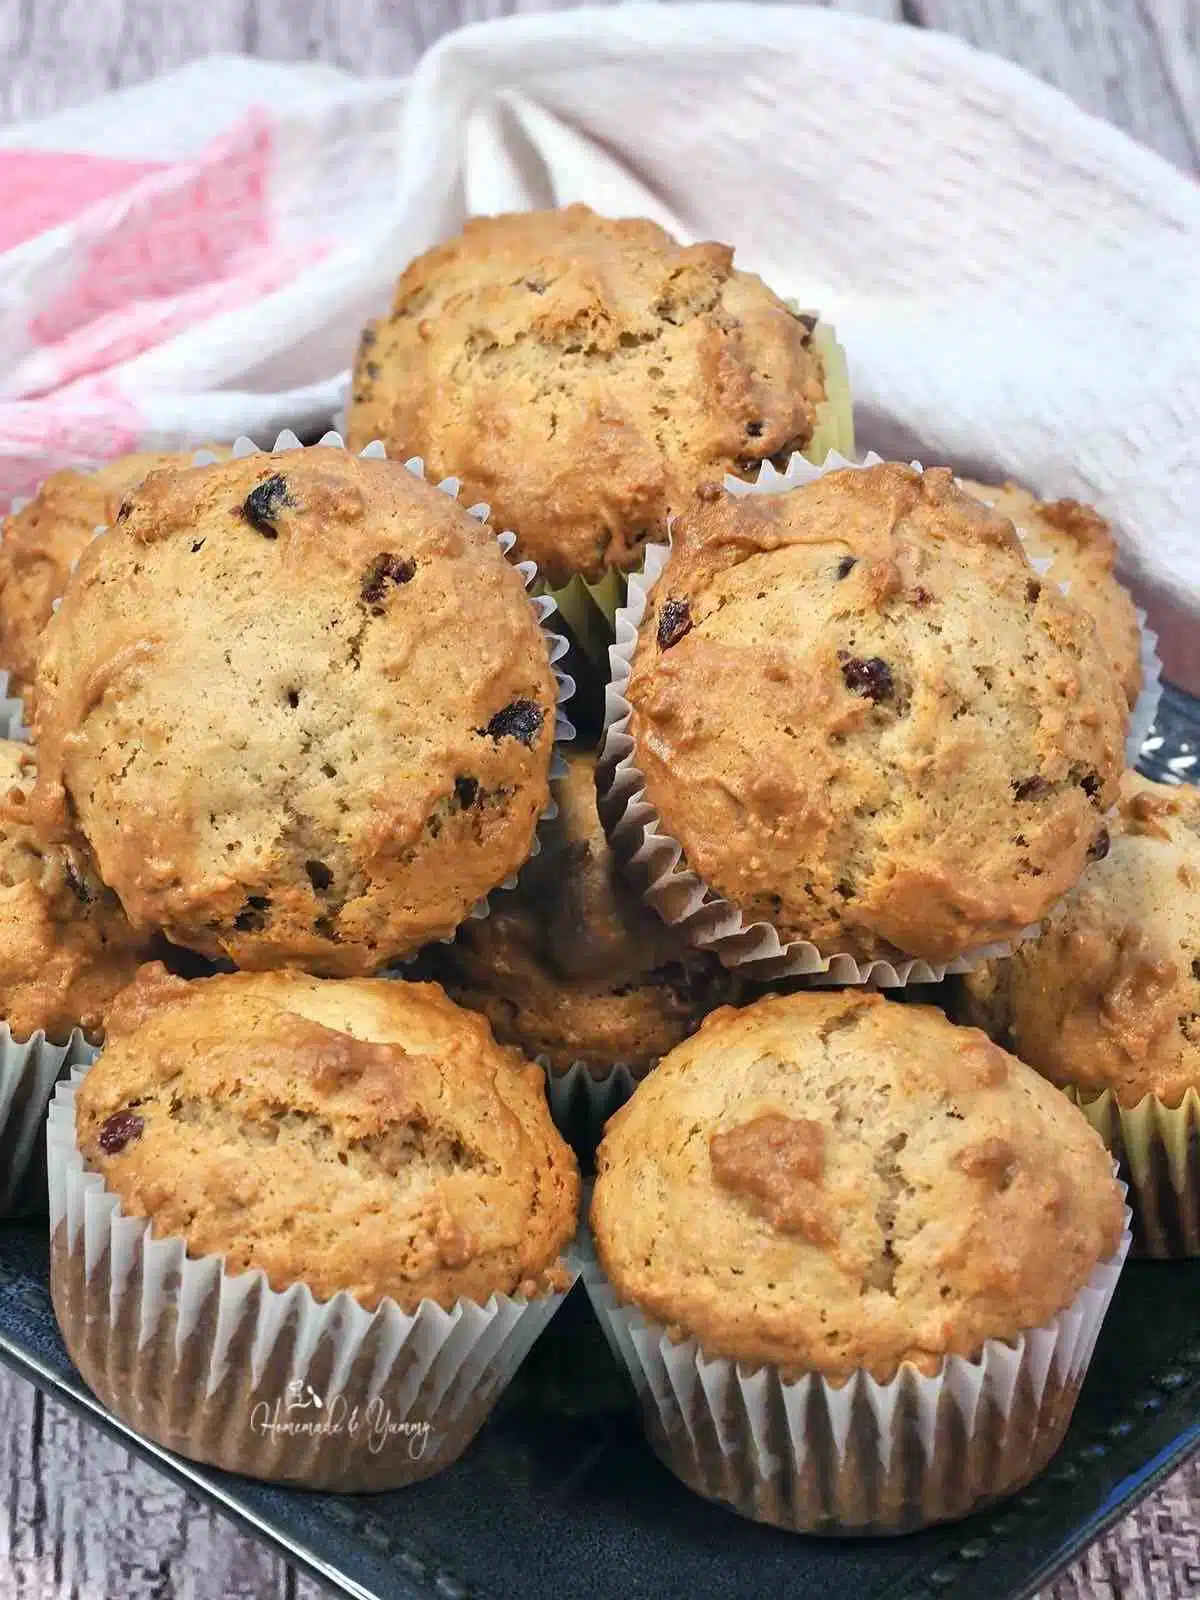 Freshly baked Cranberry Bran Muffins